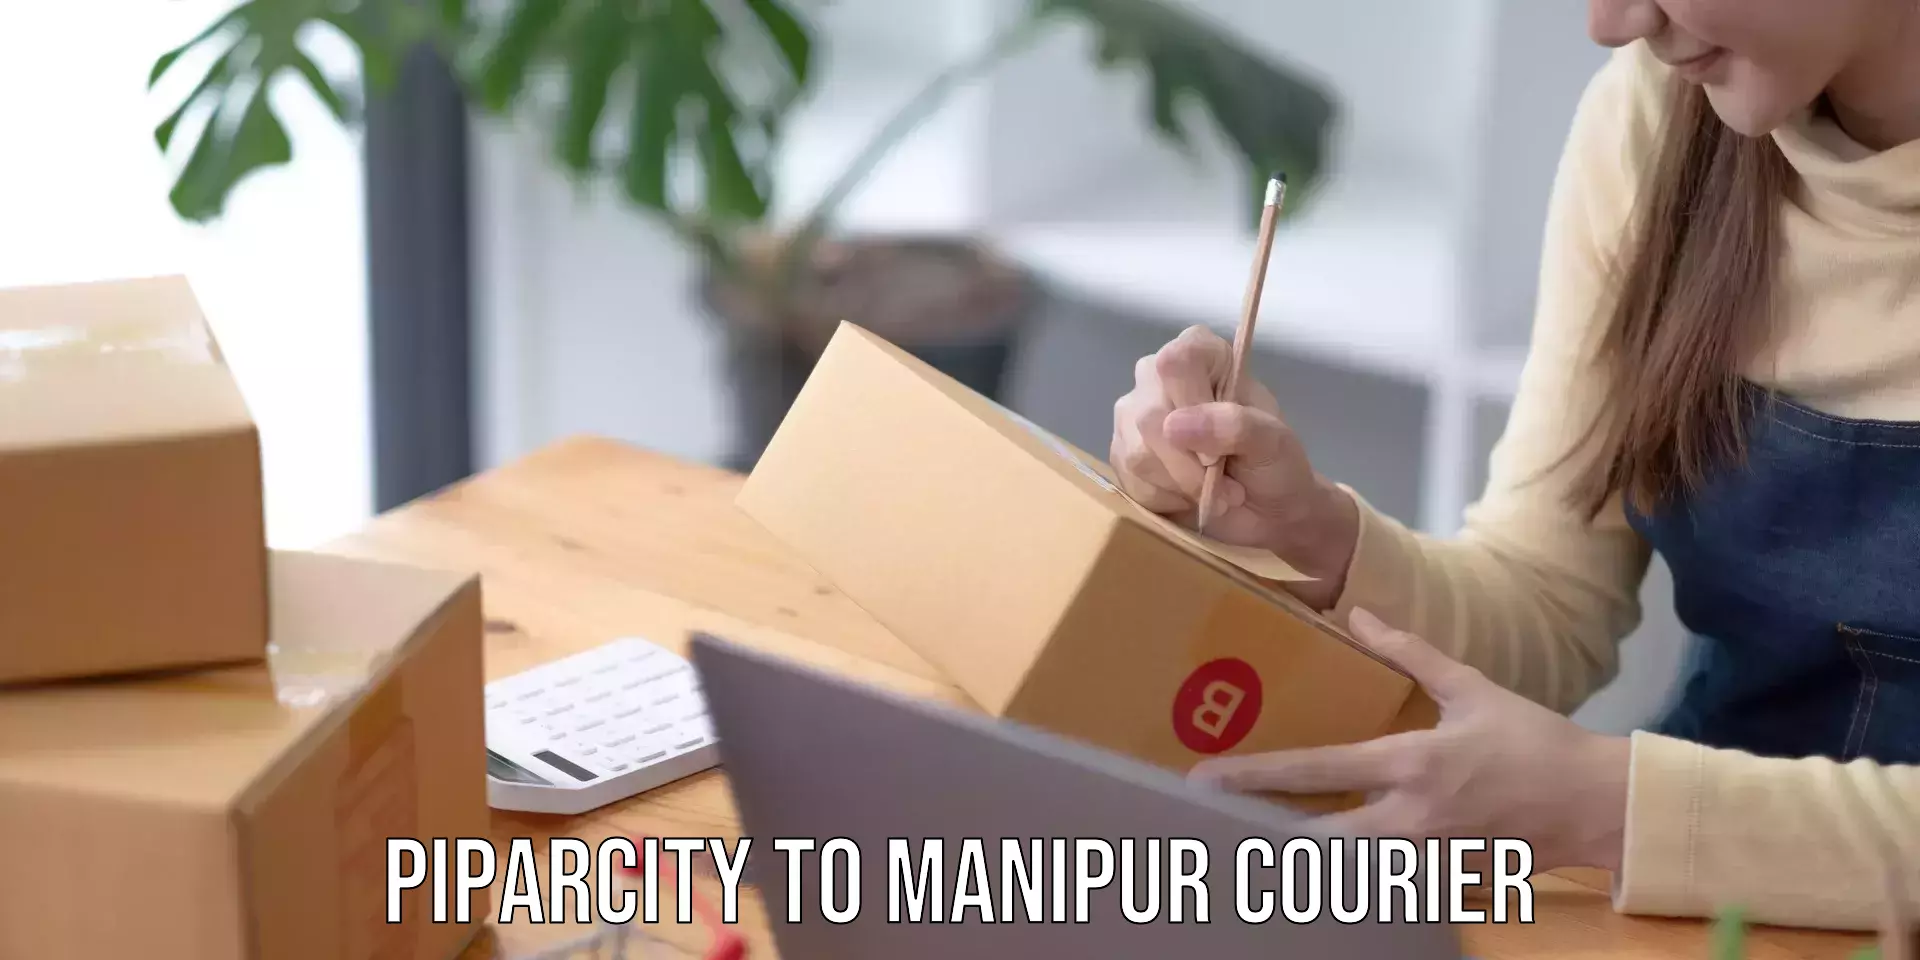 Sustainable shipping practices Piparcity to Manipur